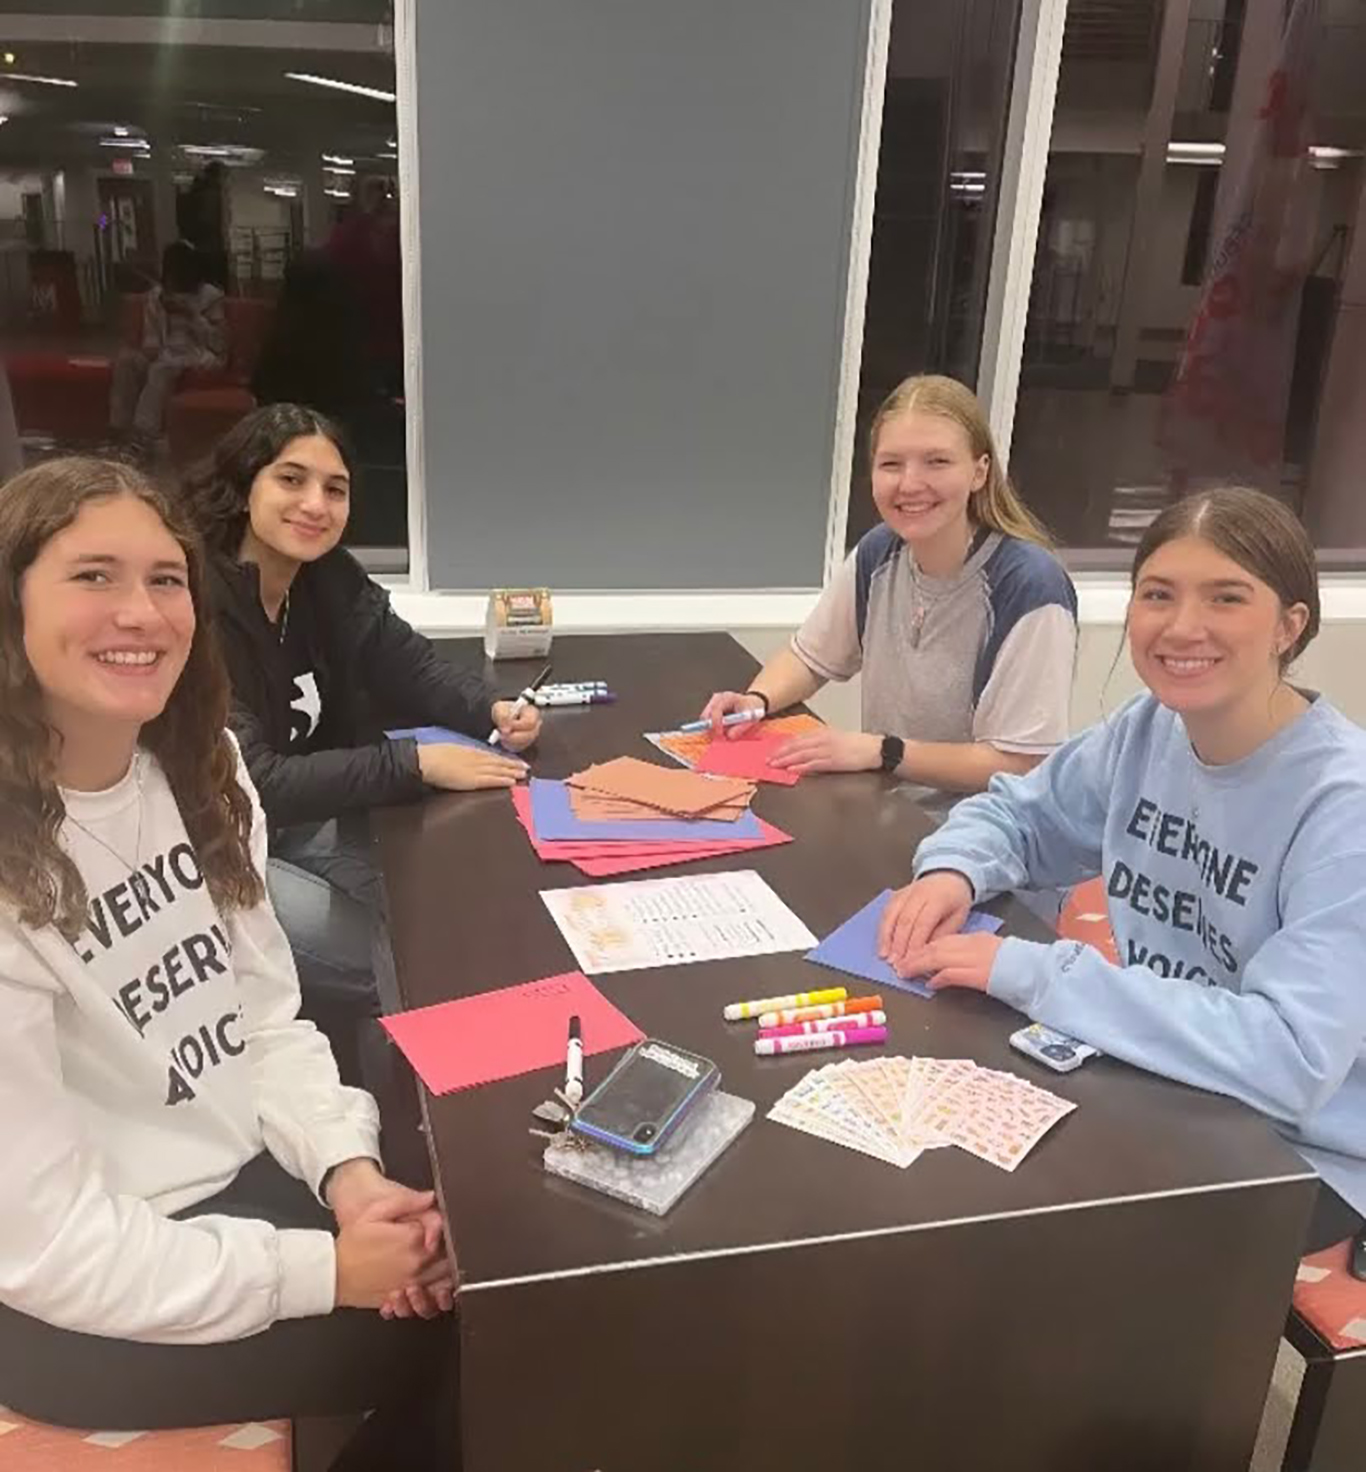 MSUM's Letters of Love card making event